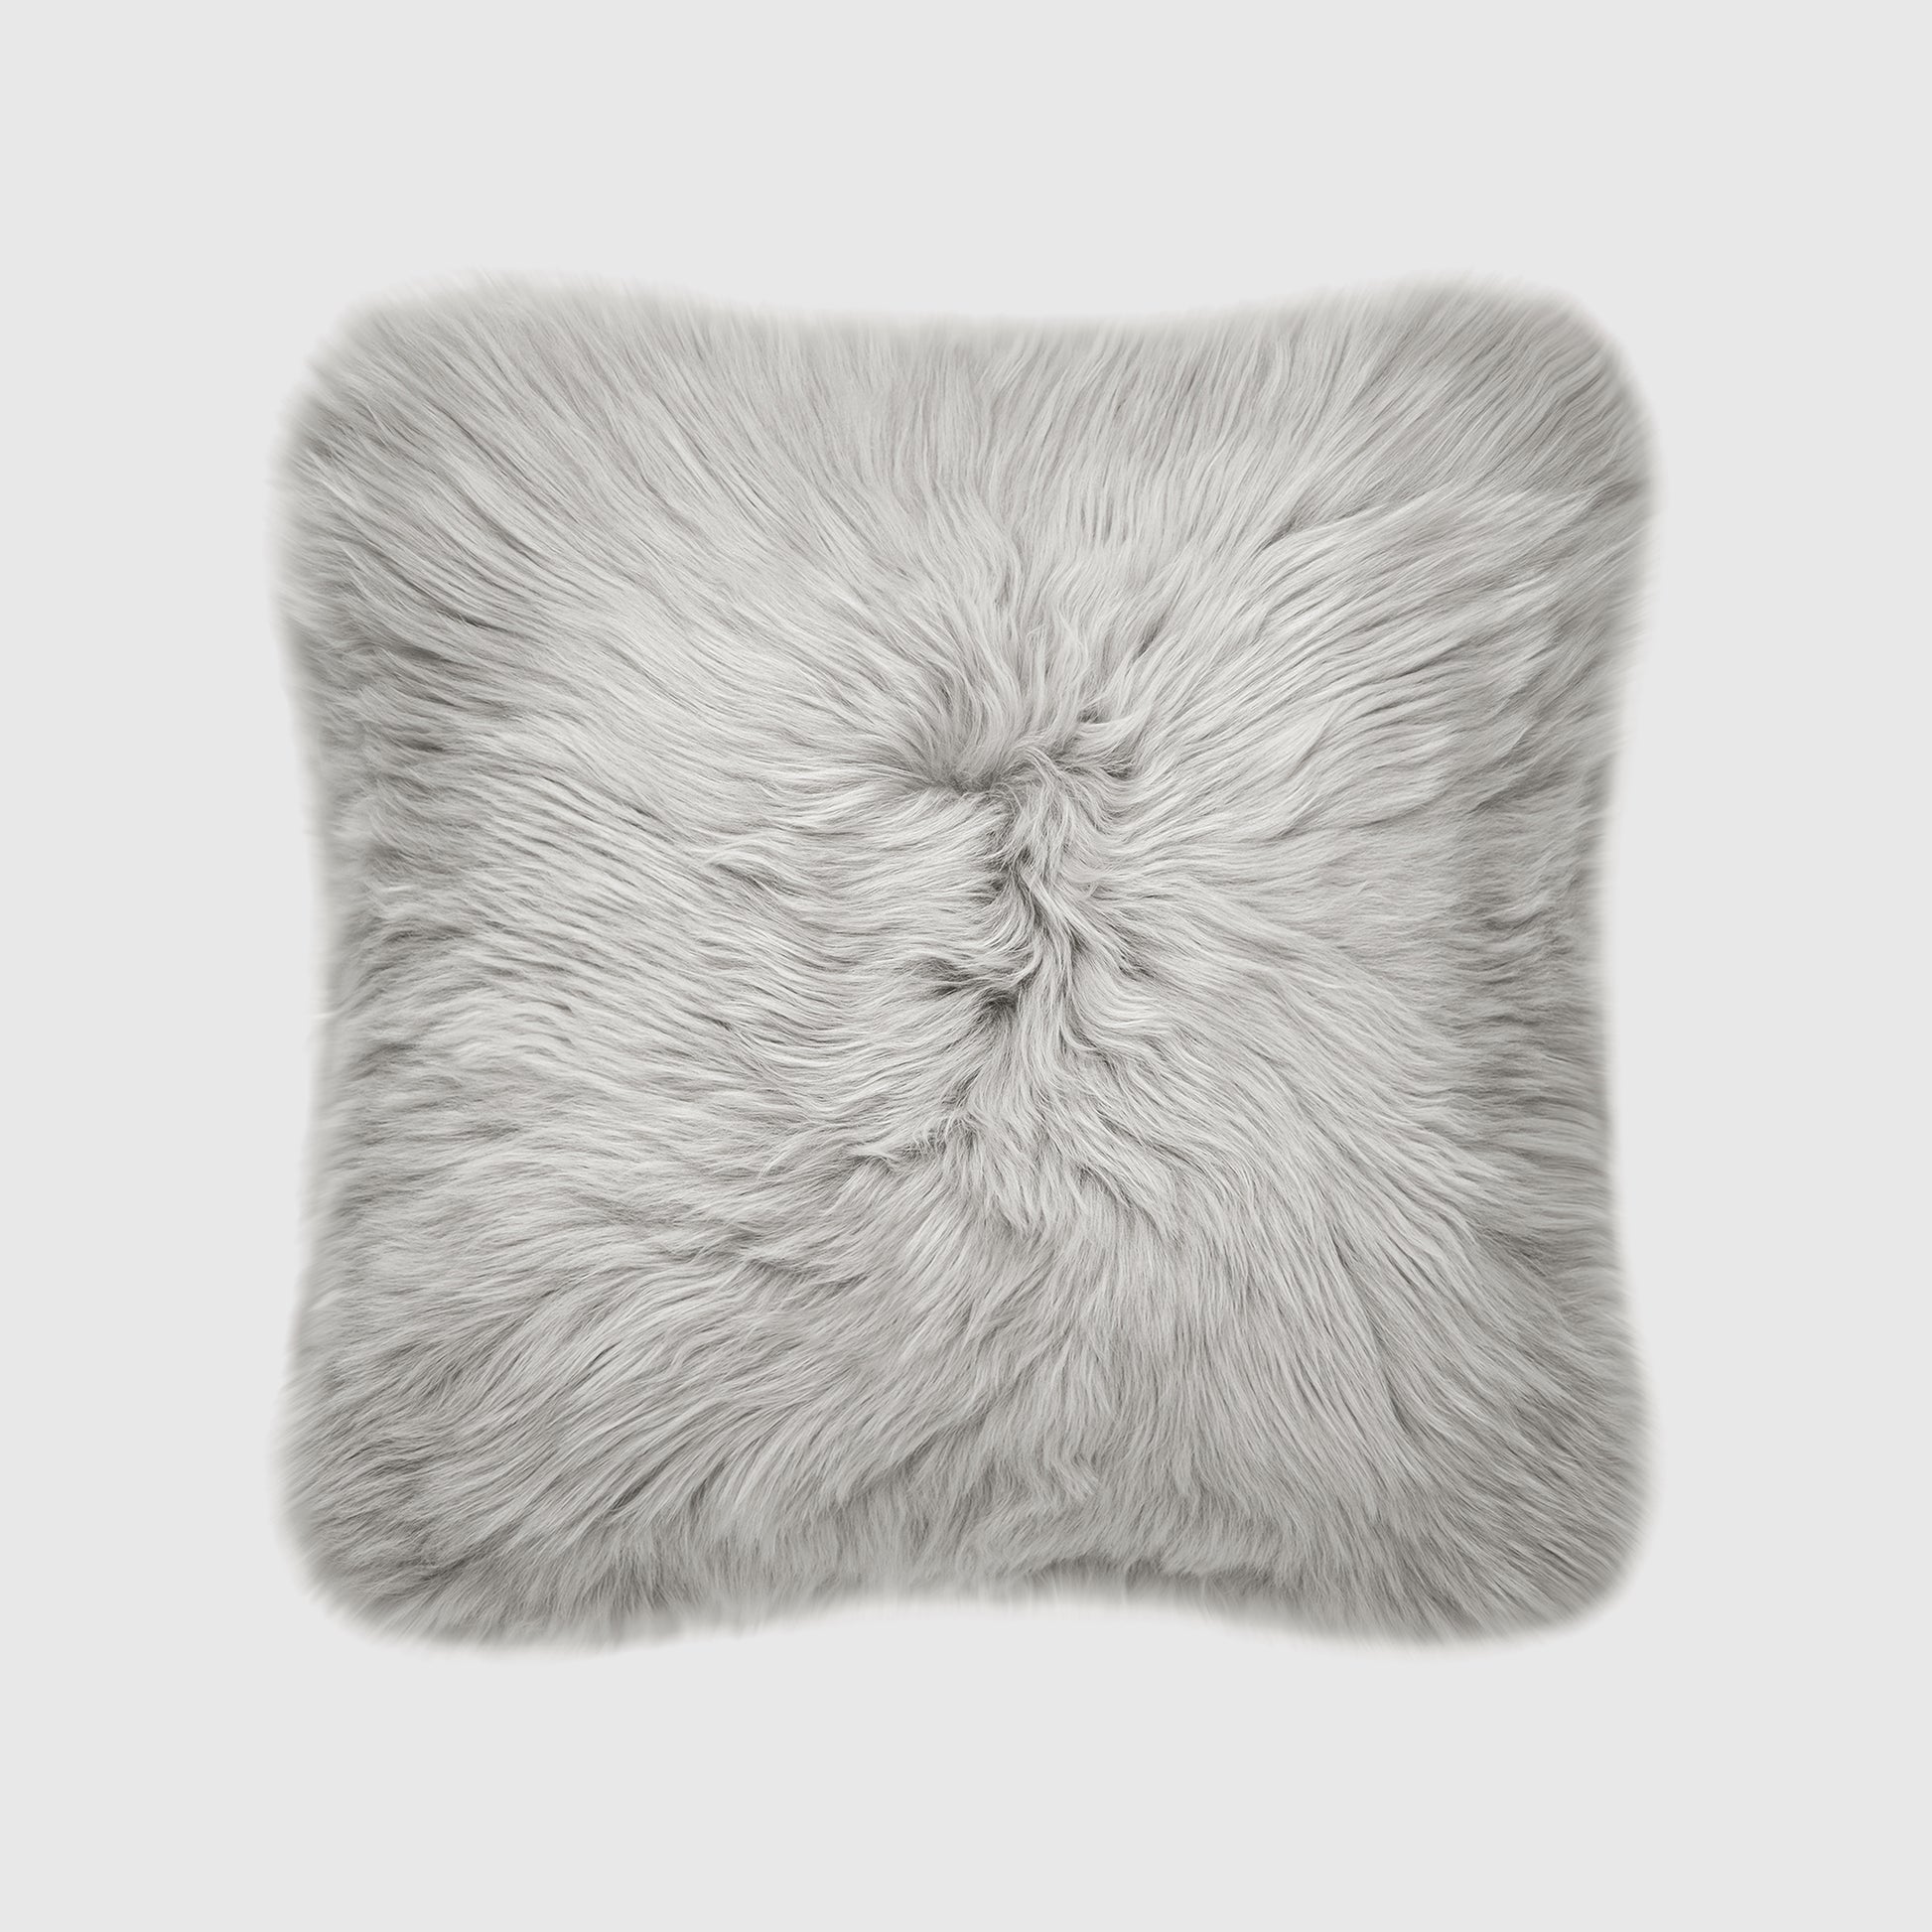 The Mood | Charlie Sheepskin Double-sided 18"x18" Pillow, Dove Gray